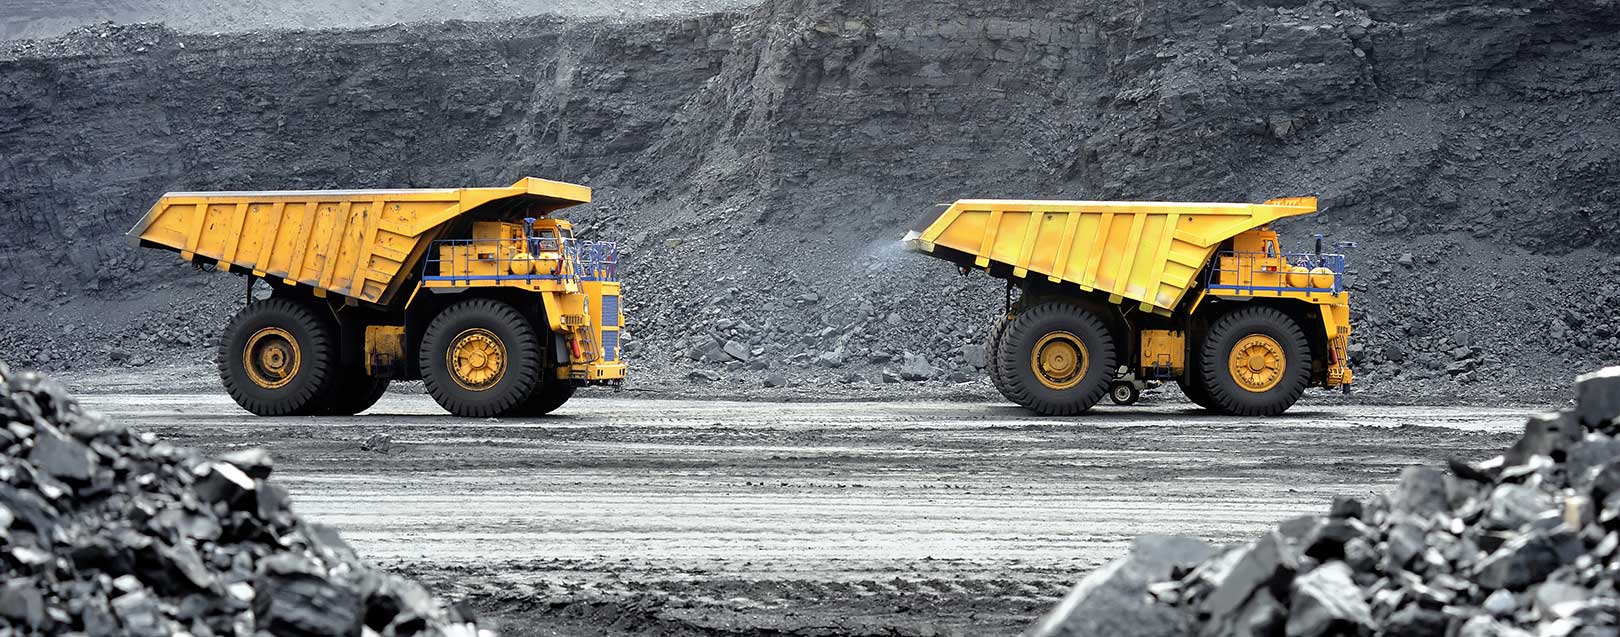 Govt generates Rs 1,748 cr from coal mines auction  